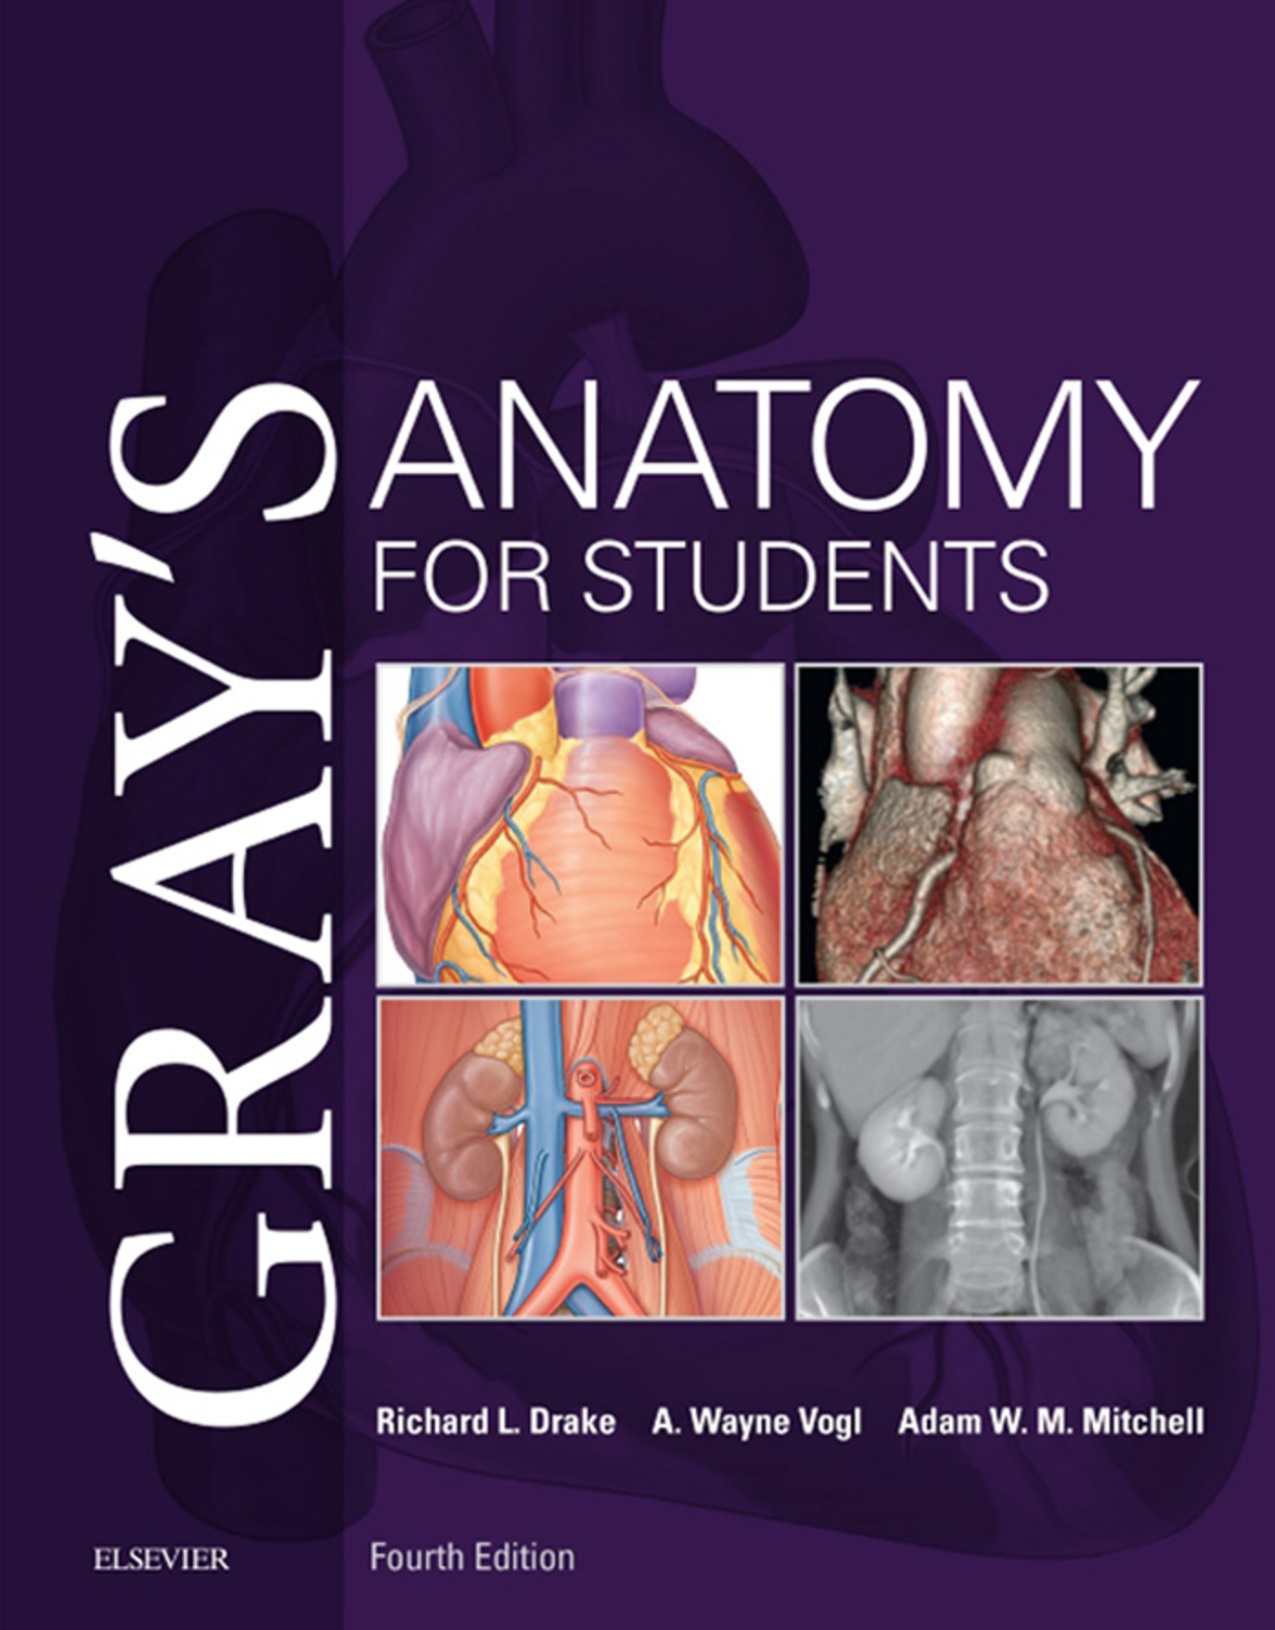 Gray’s Anatomy for students fourth edition pdf book free download